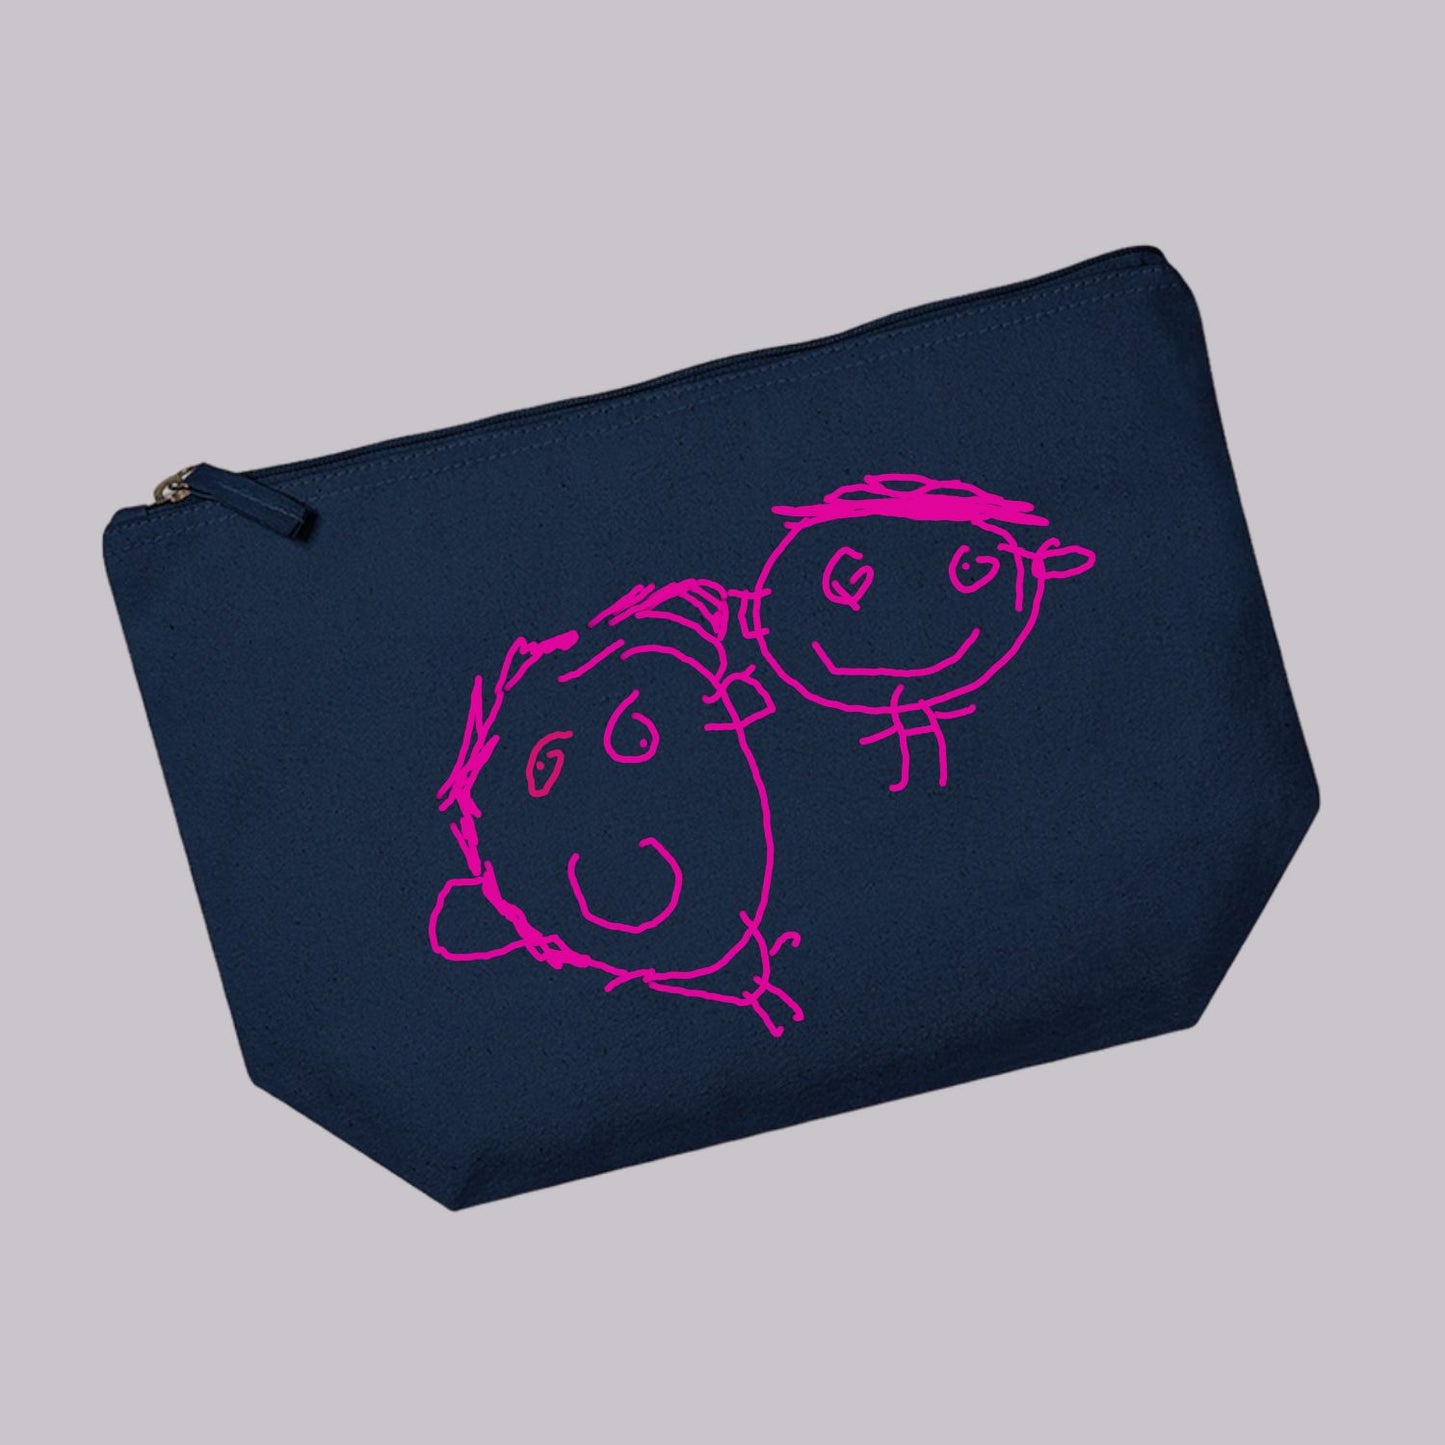 Personalised wash bag with child’s artwork